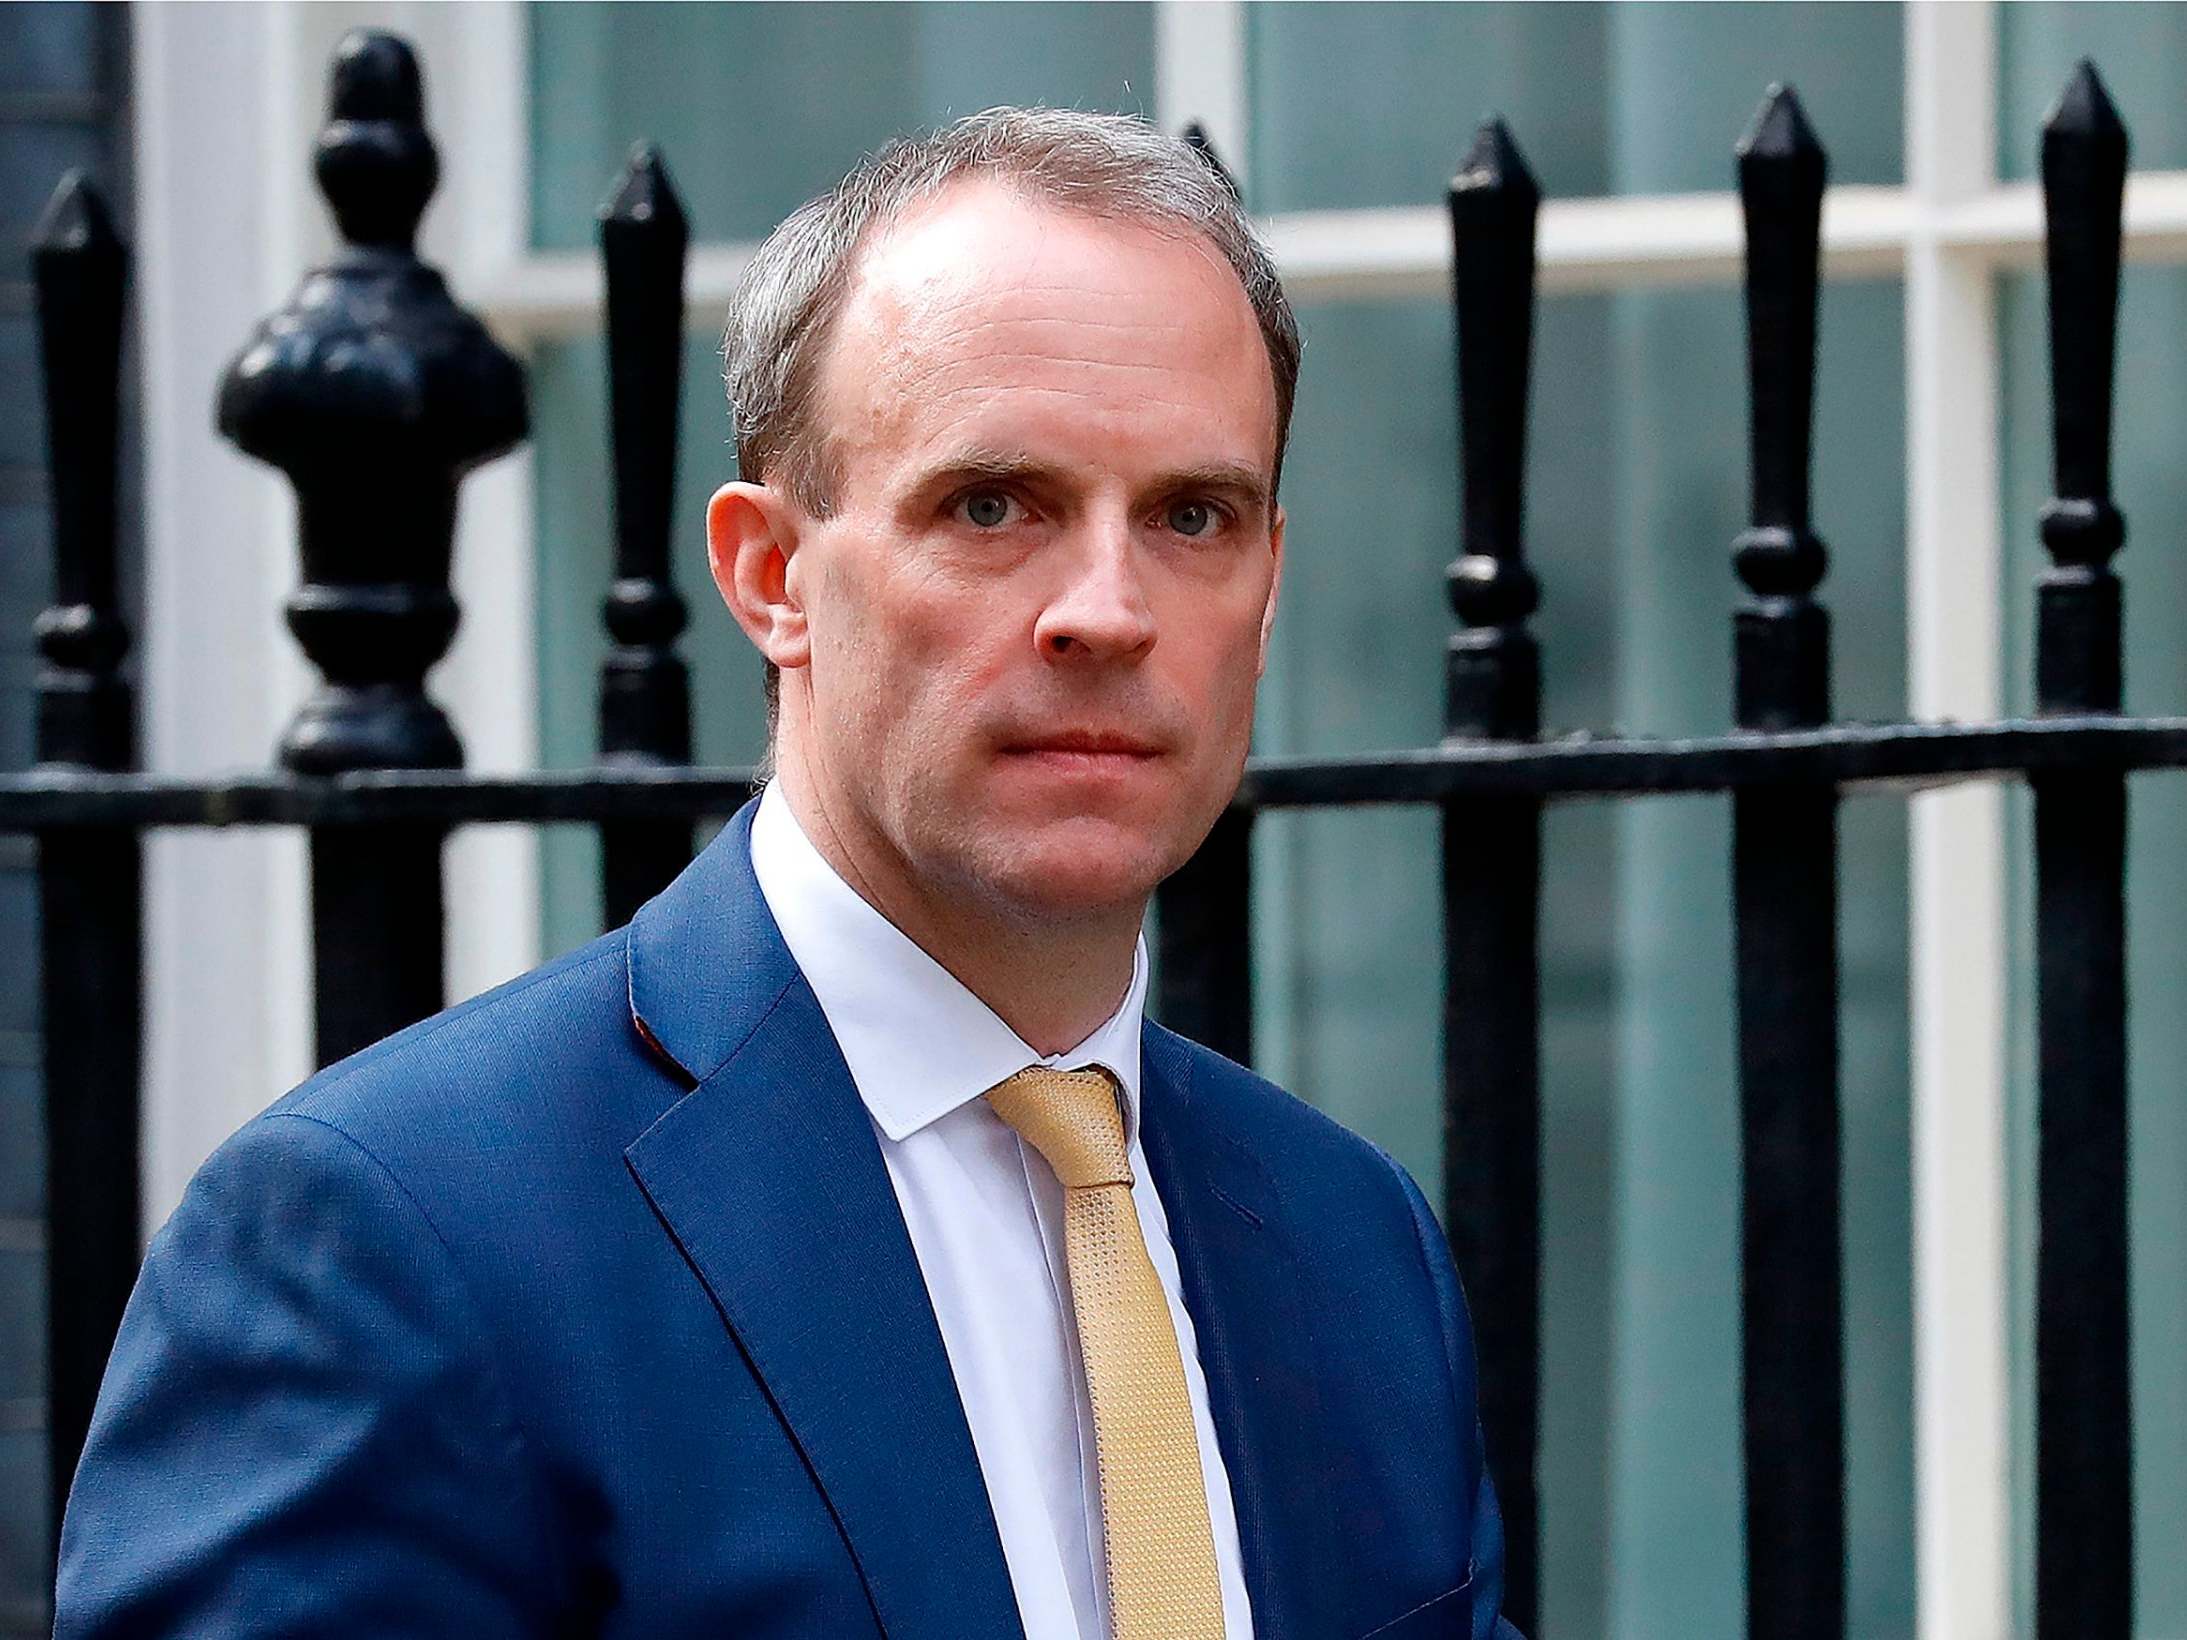 Foreign Secretary Dominic Raab arrives at 10 Downing Street